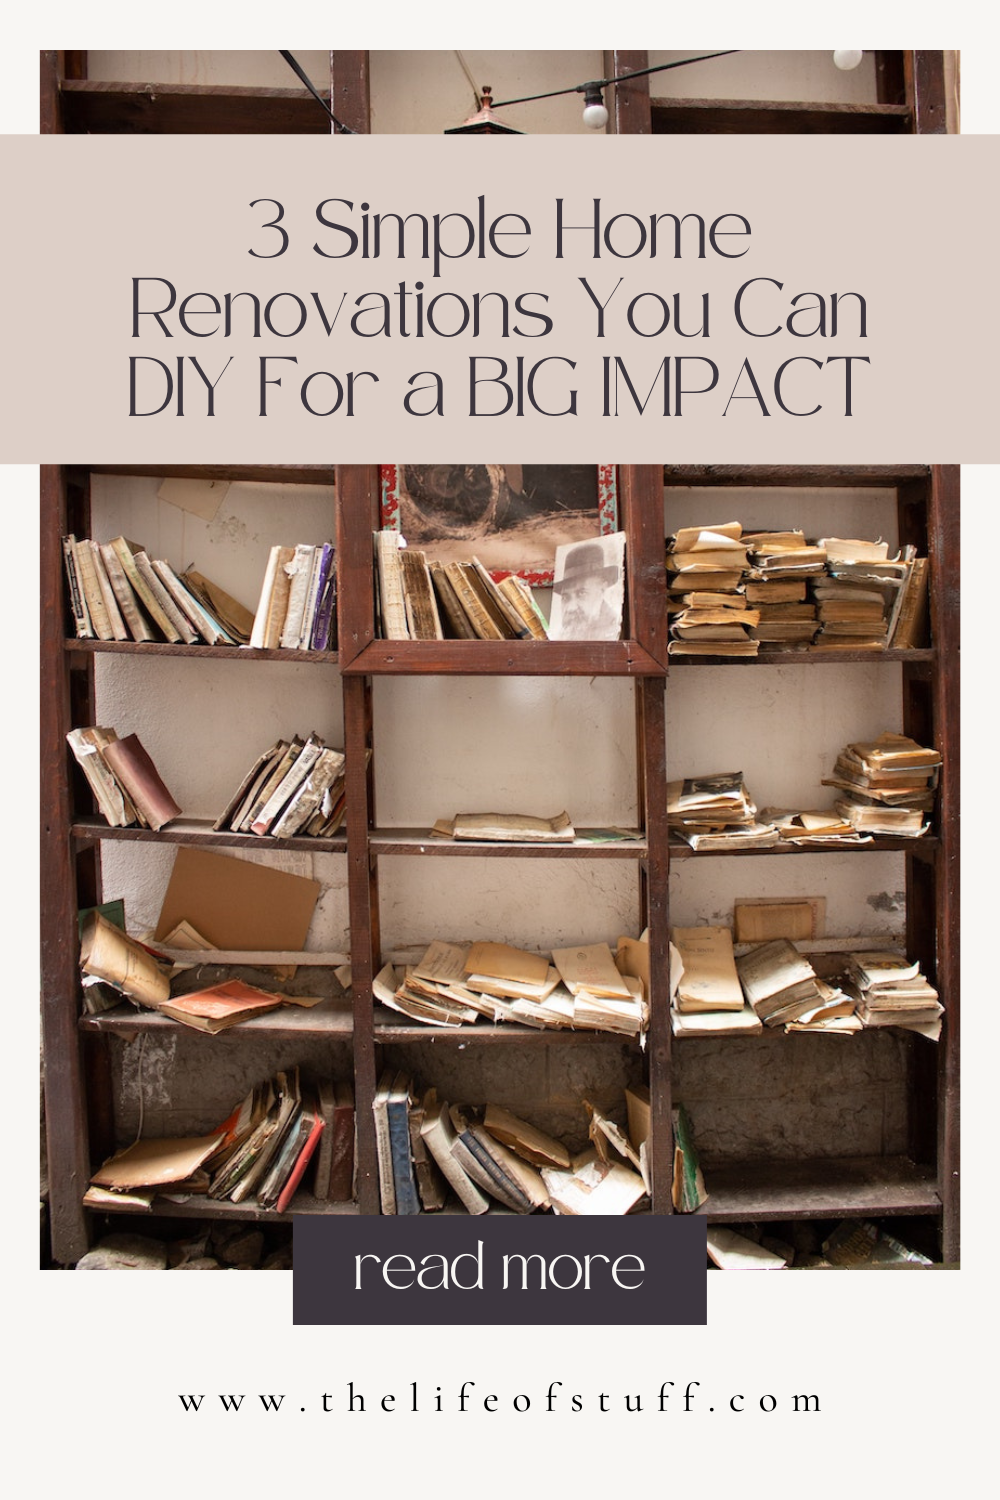 3 Simple Home Renovations You Can DIY For a BIG IMPACT - The Life of Stuff